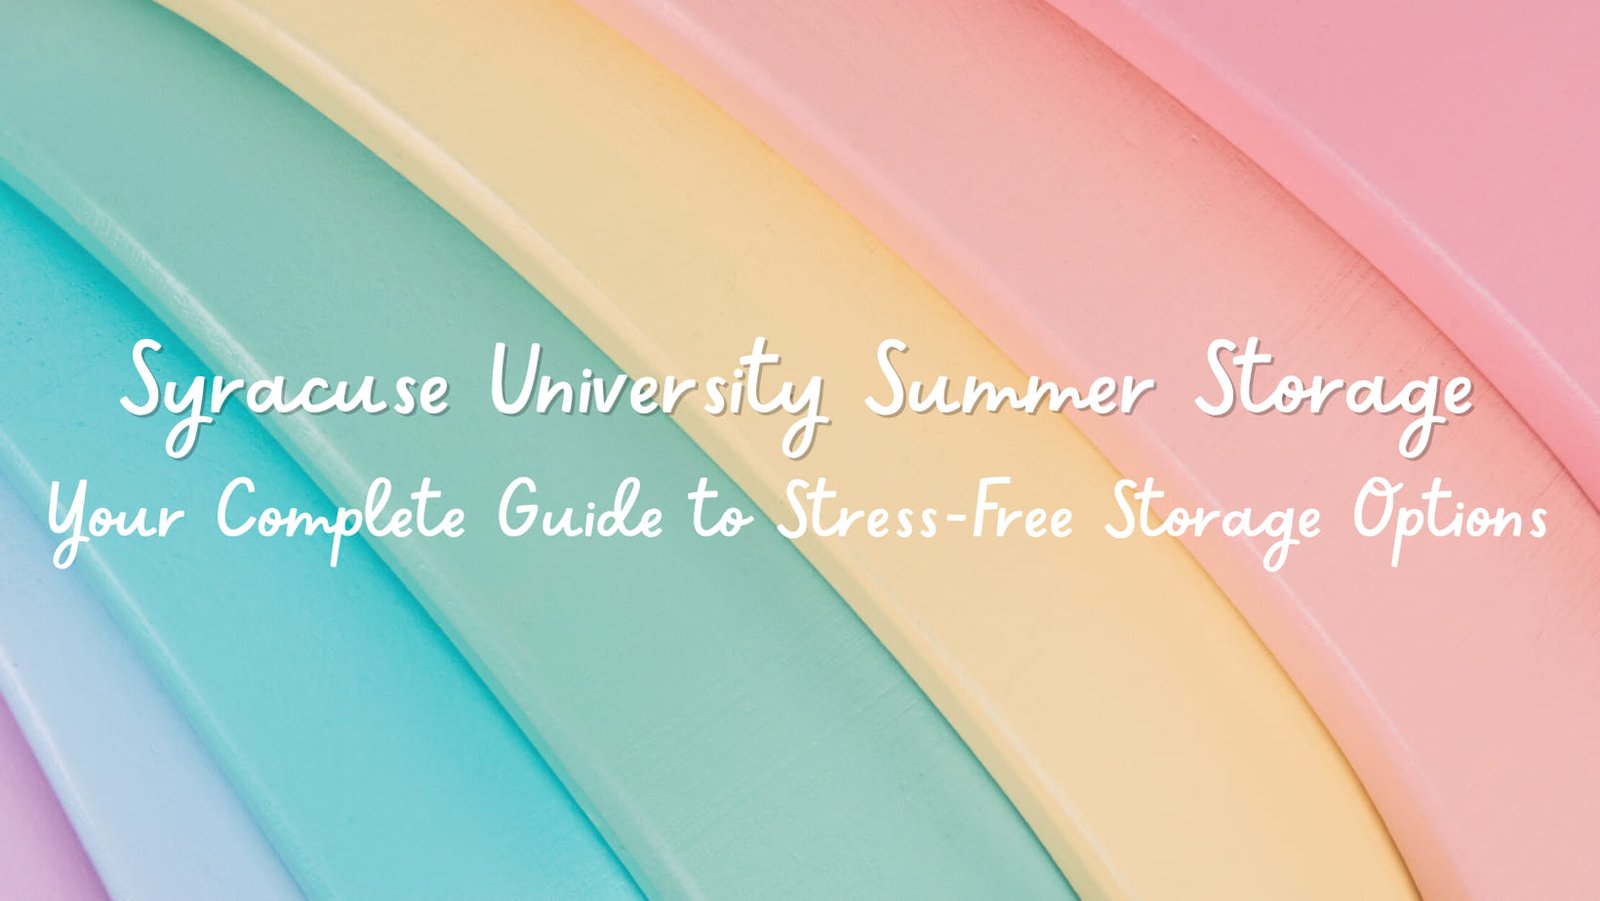 Syracuse University Summer Storage: Your Complete Guide to Stress-Free Storage Options